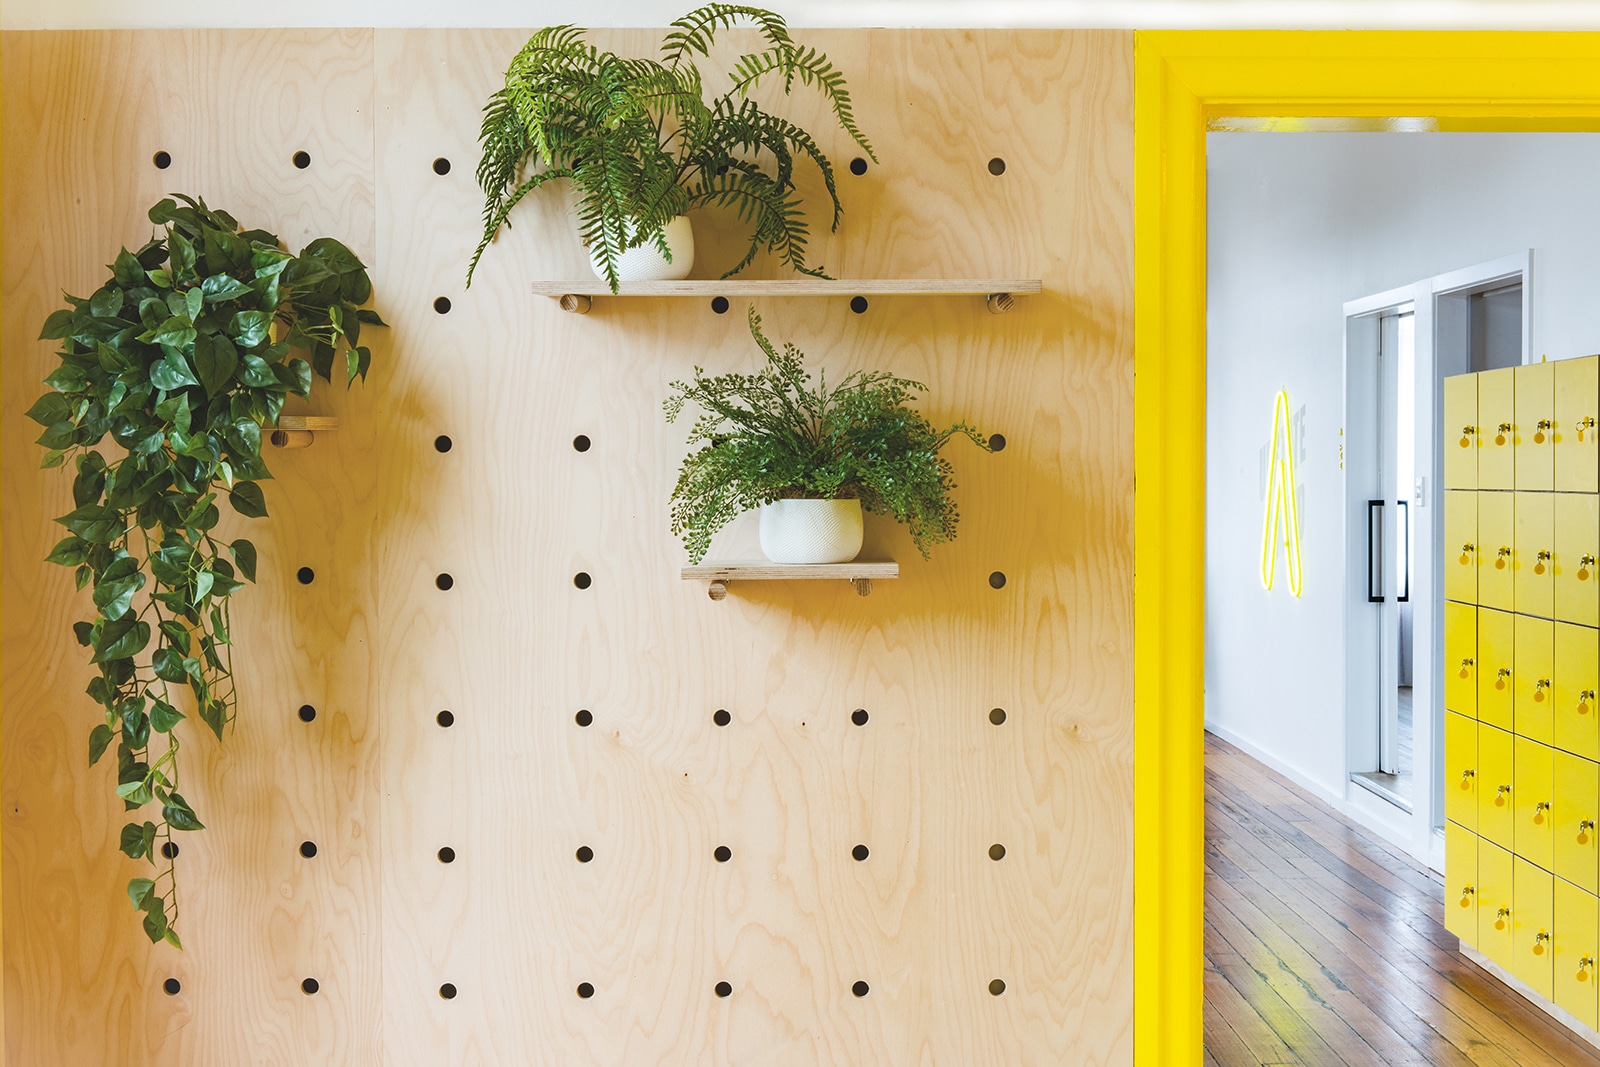 A wood wall and bright yellow door trims create a welcoming space at Upstate Studios. Small pot plants and natural light create a grounding fresh fitness studios space.